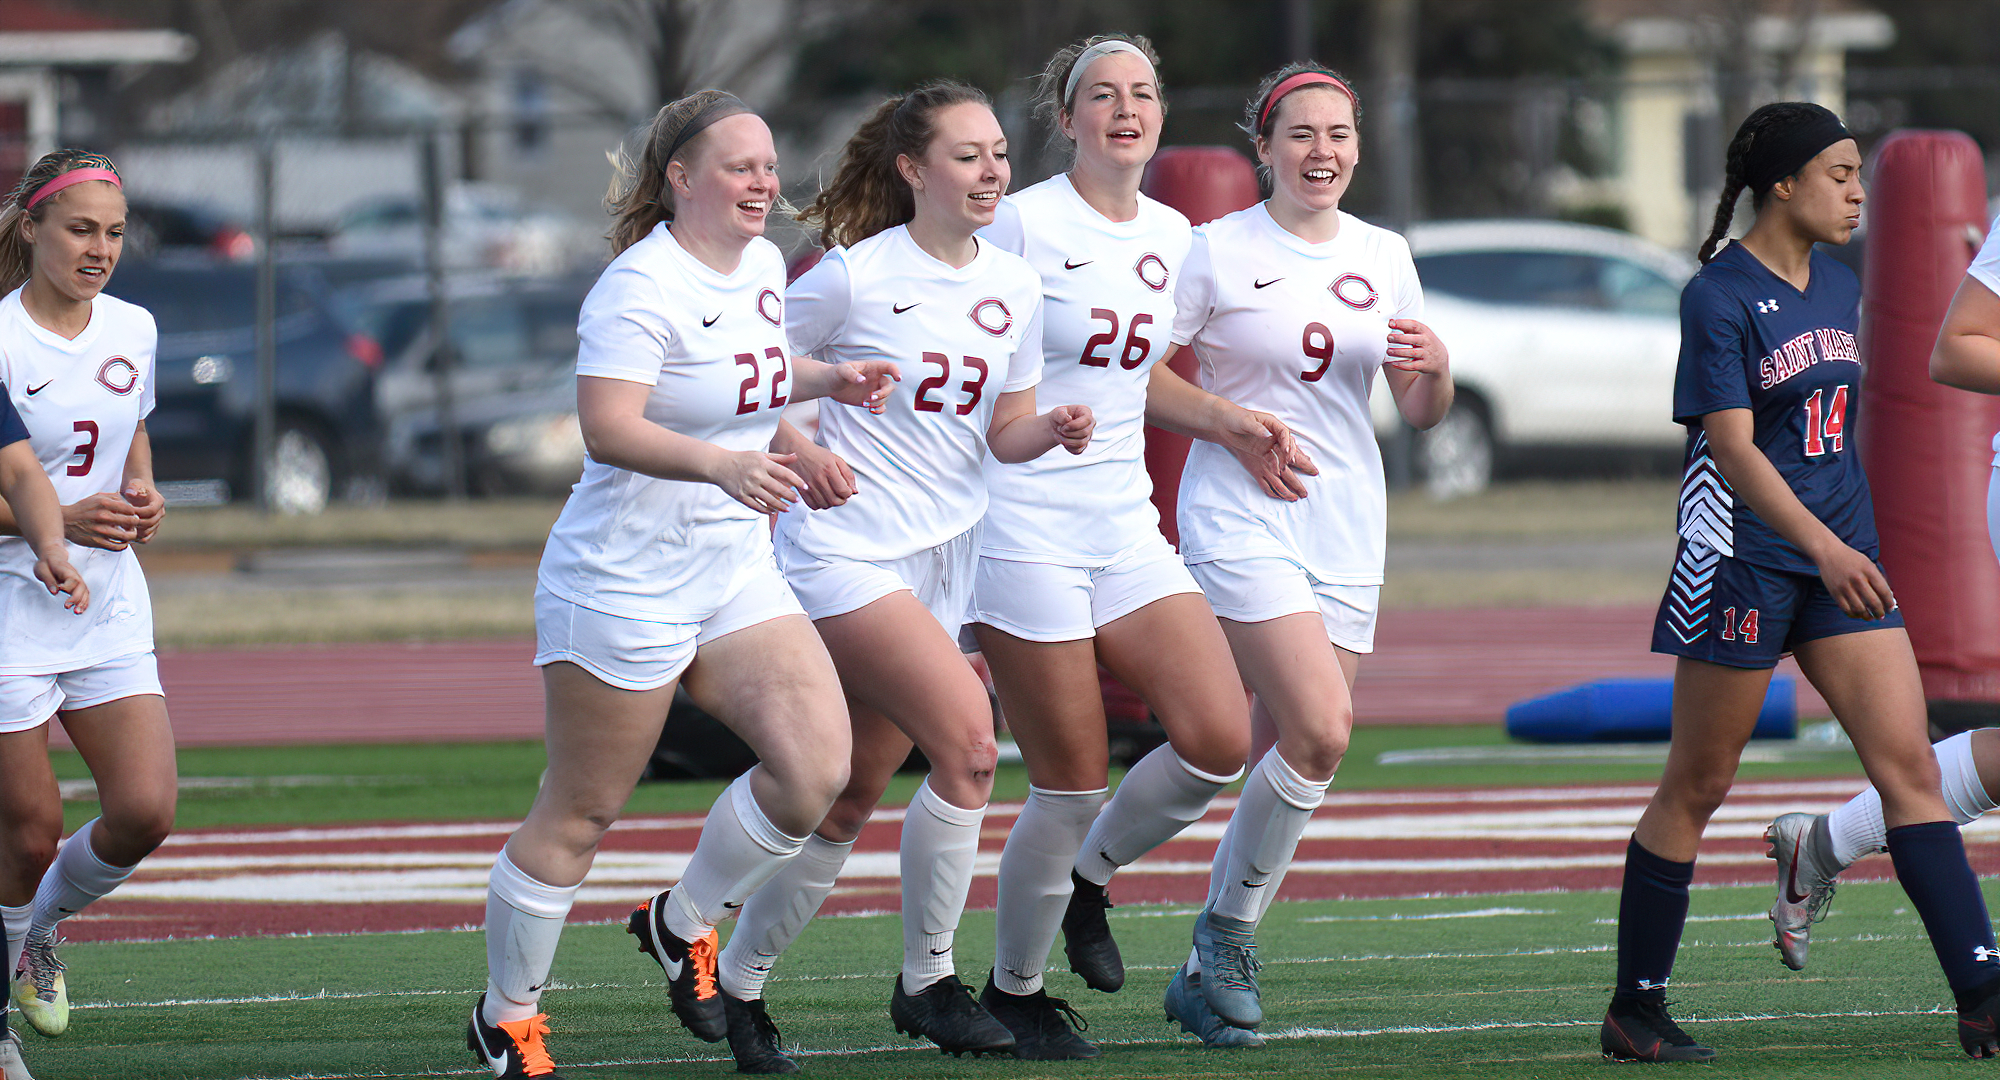 The Cobbers celebrate Samantha Dalsin's (#22) header goal in the second half against St. Mary's.